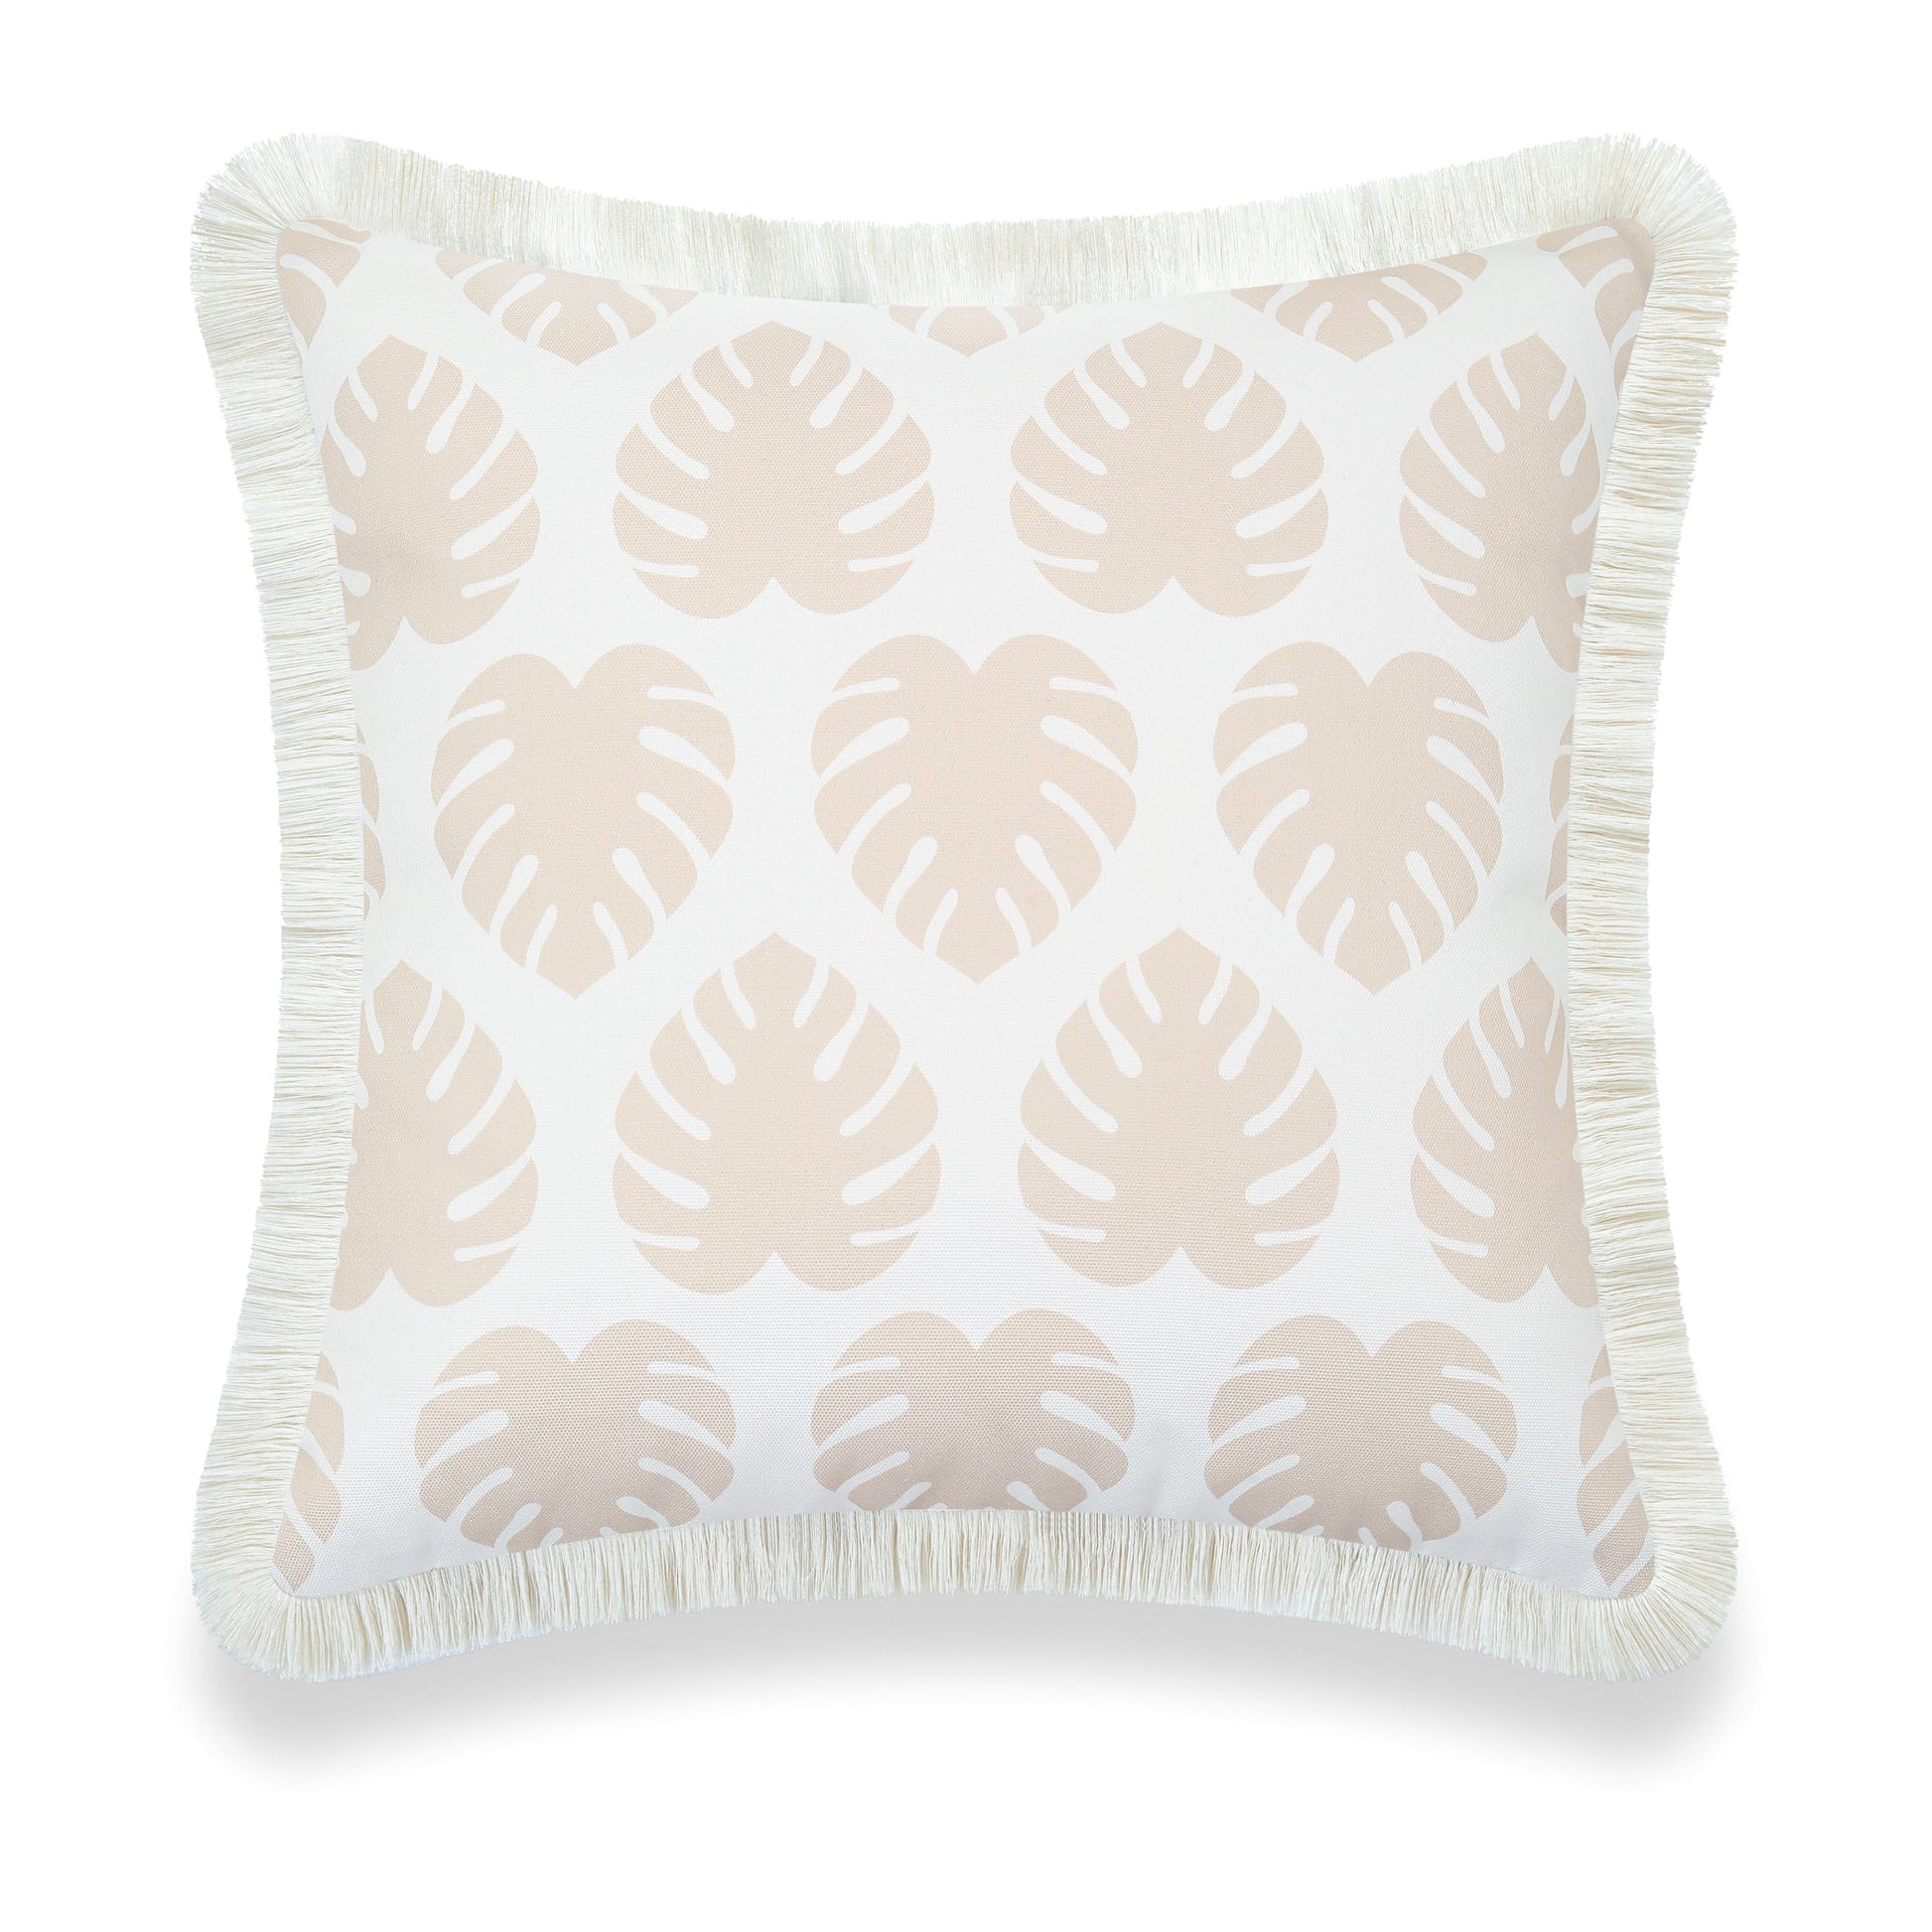 Fall Coastal Indoor Outdoor Pillow Cover, Monstera Leaf Fringe, Neutral Tan, 20"x20"-5